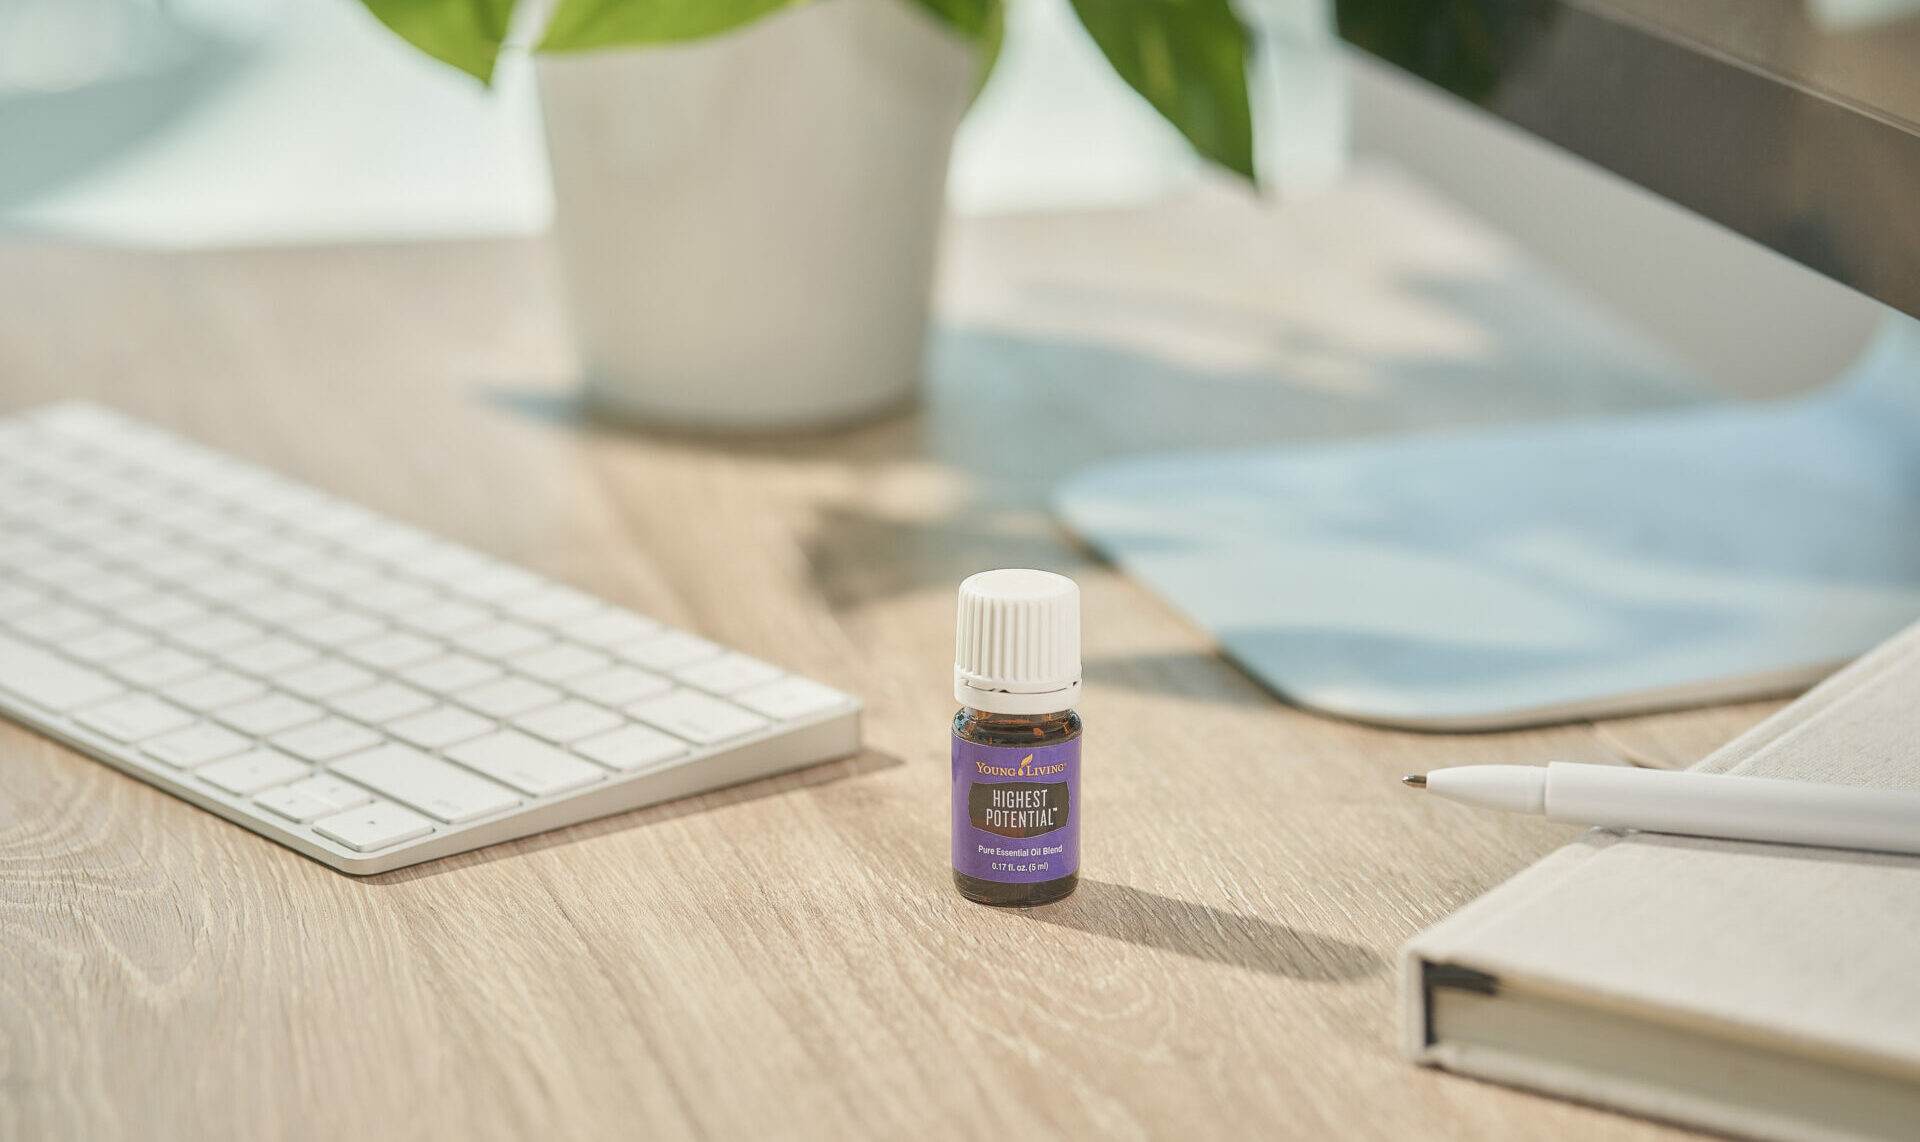 Highest Potential Essential Oil Blend sitting on desk near keyboard and plant - Young Living Lavender Life Blog